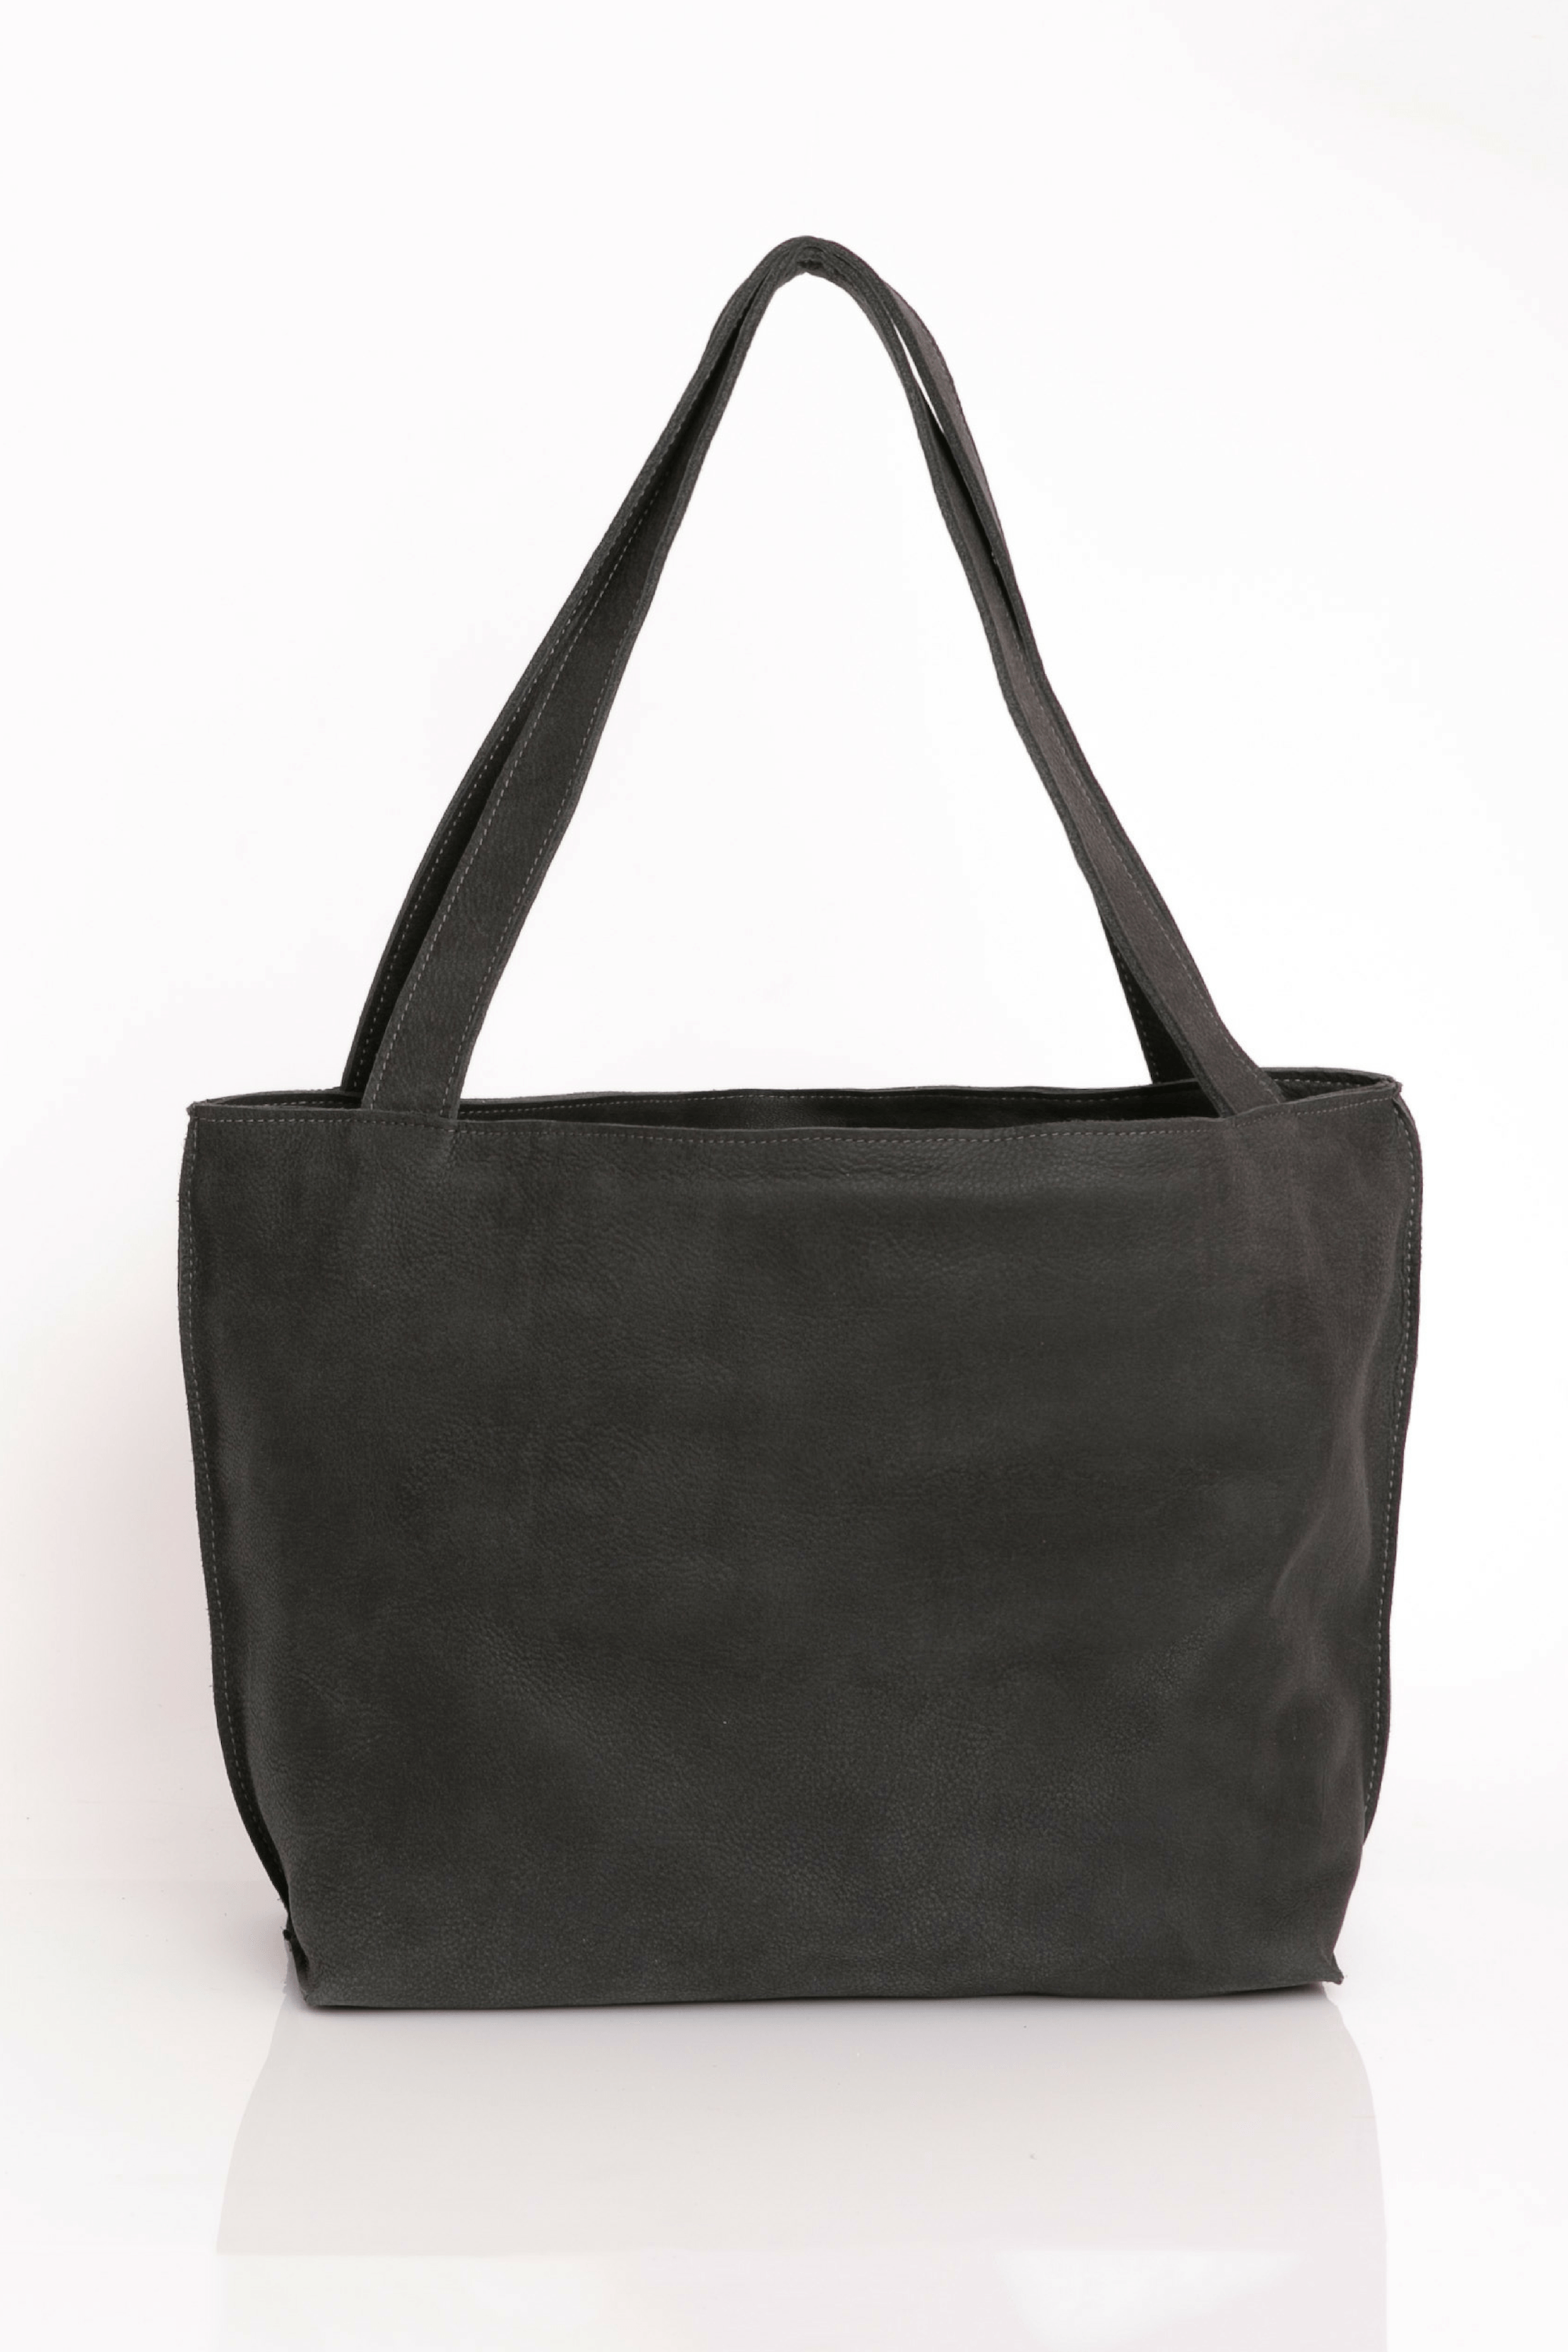 Buy BLACK LEATHER Tote Bag, BLACK Slouchy Tote, Large Handbag for Women,  Everyday Shopper, Large Leather Purse, Weekender Oversize Bag Online in  India - Etsy